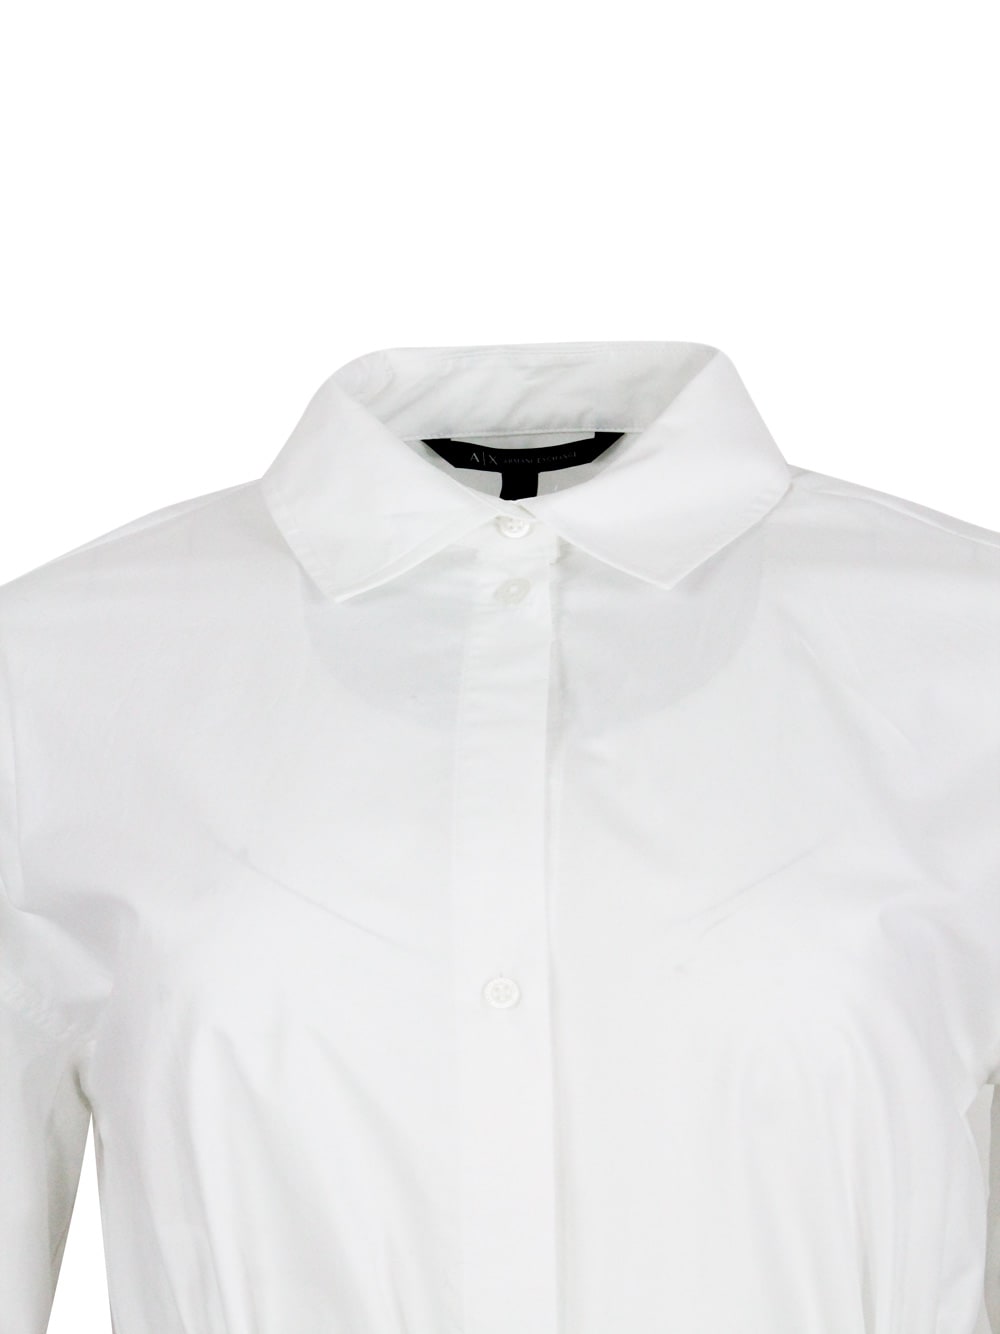 Shop Armani Collezioni Dress Made Of Soft Cotton With Long Sleeves, With Button Closure On The Front And Belt. In White